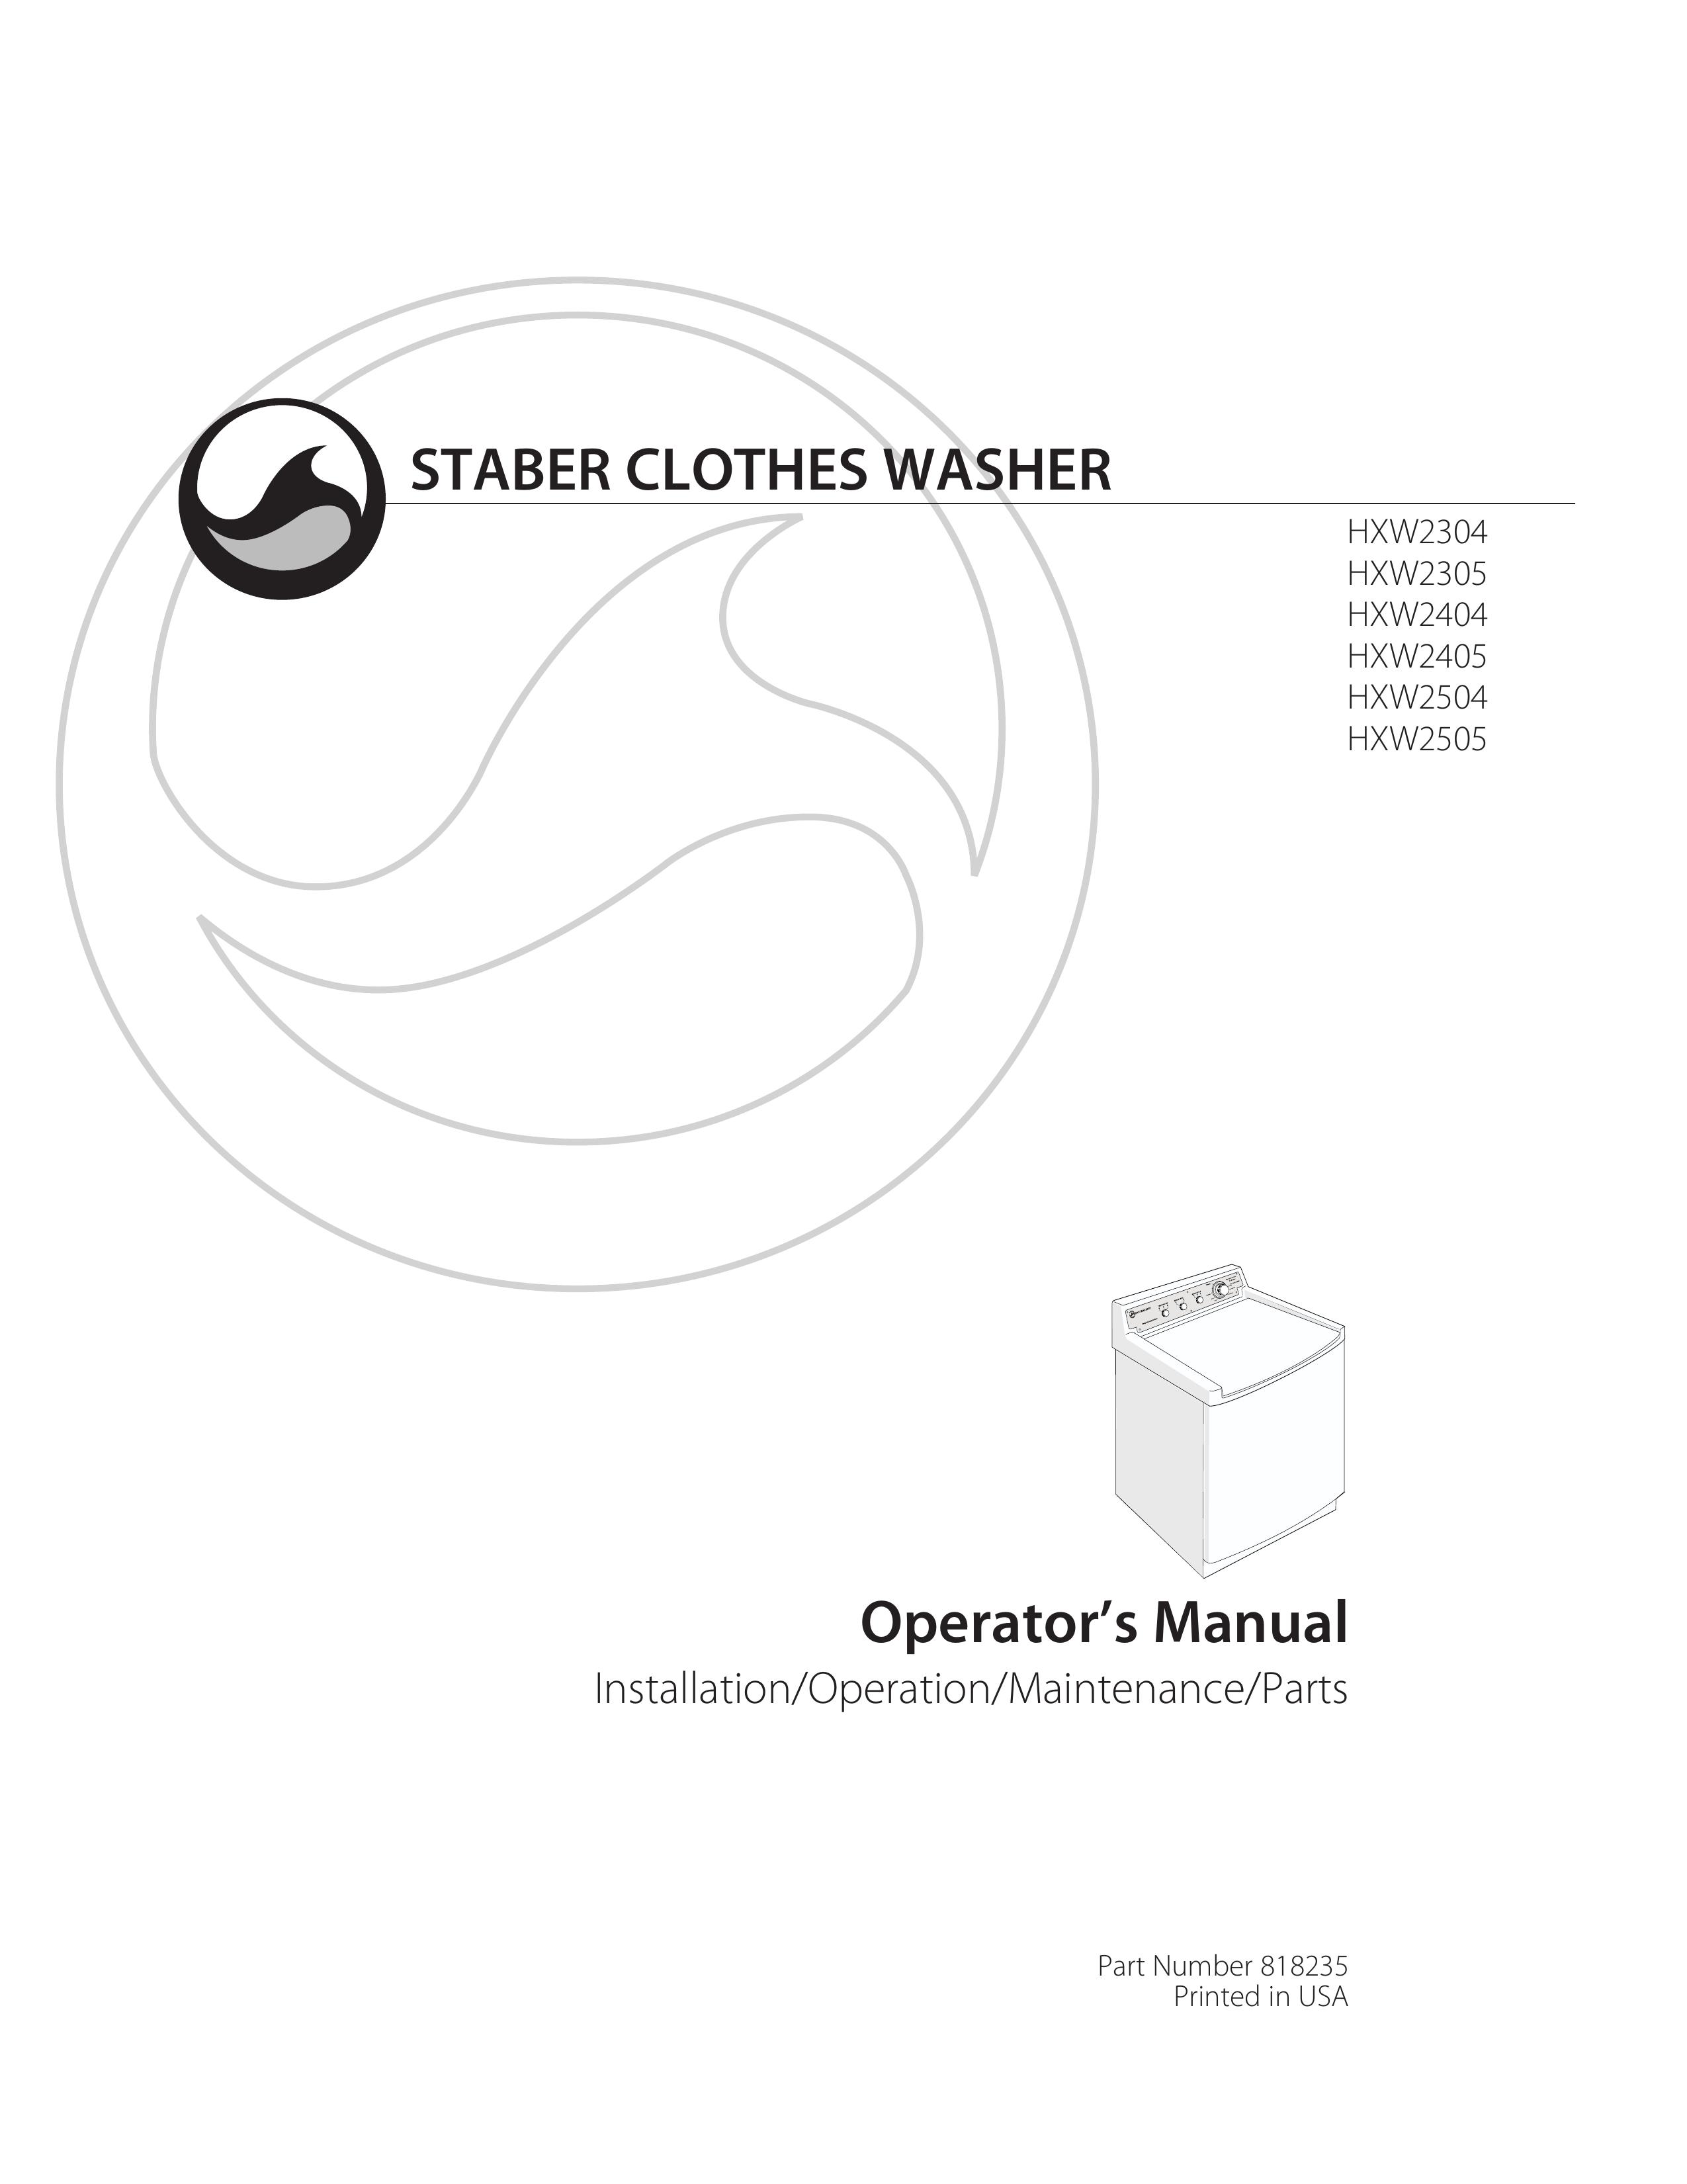 Staber Industries HXW2305 Washer User Manual